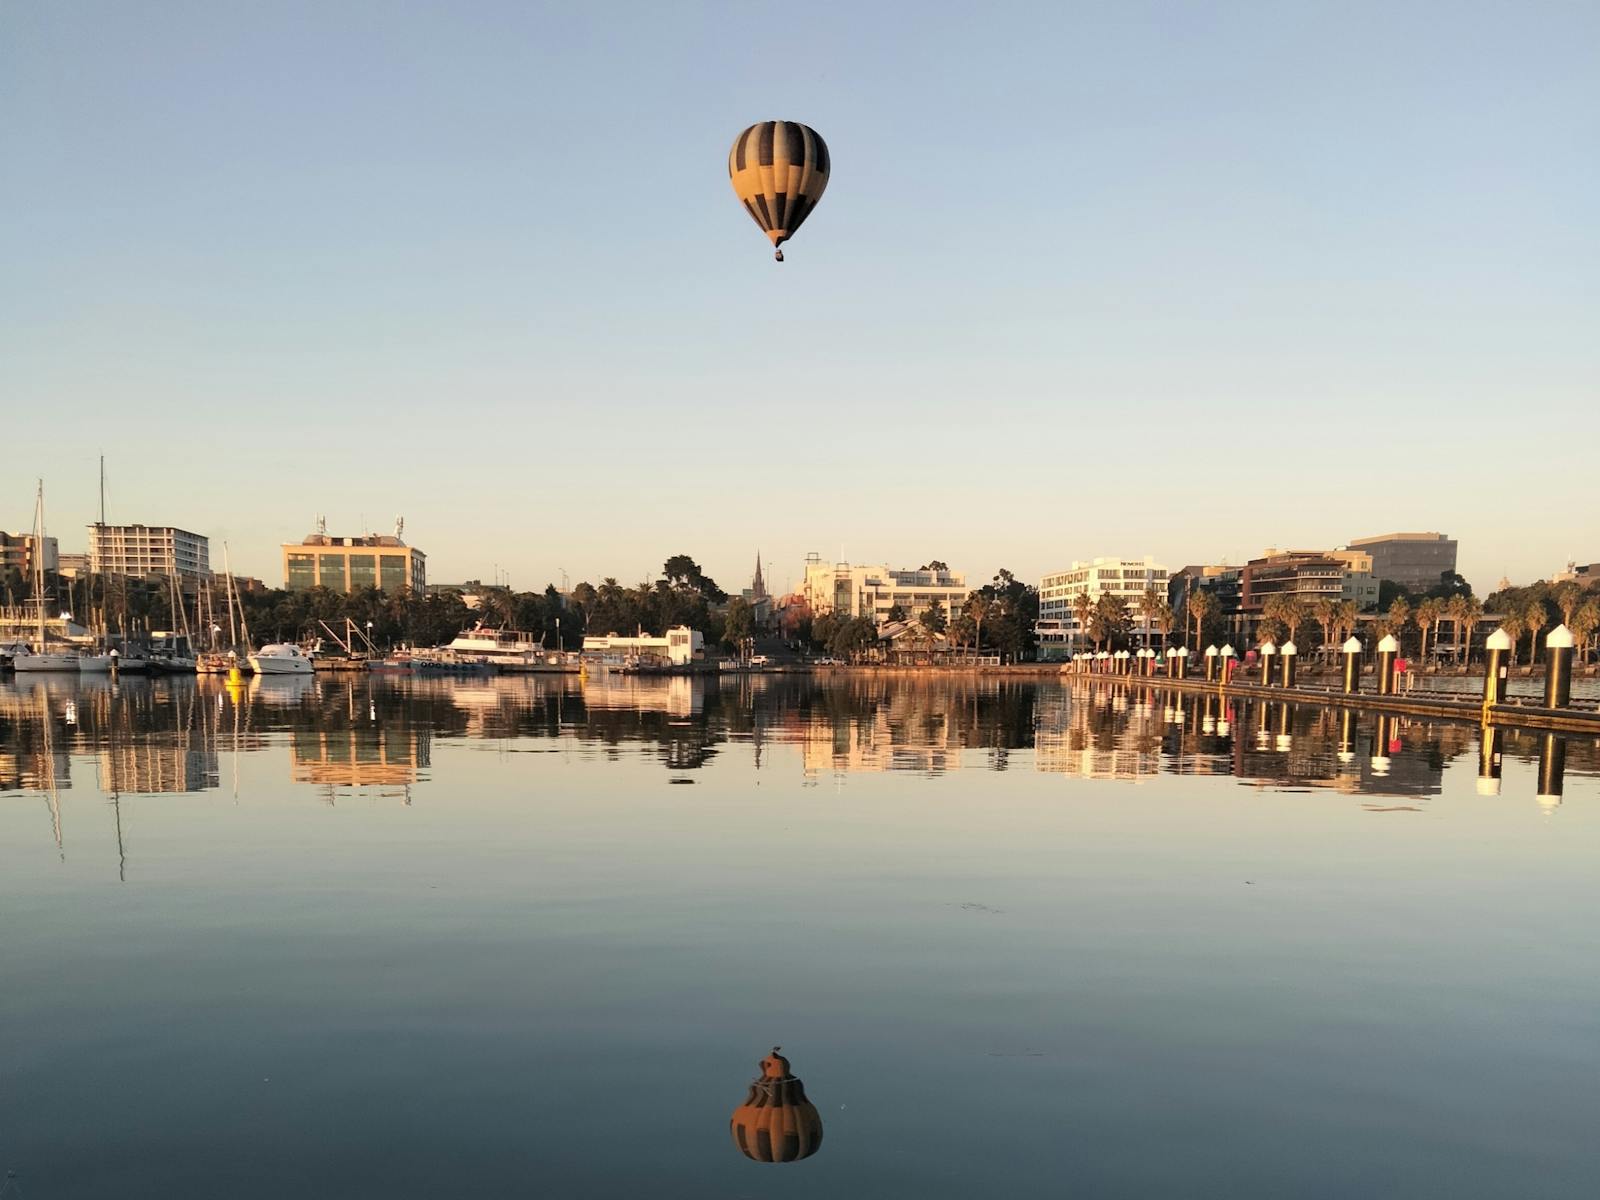 Balloon over the peir with the shimmering reflection below.